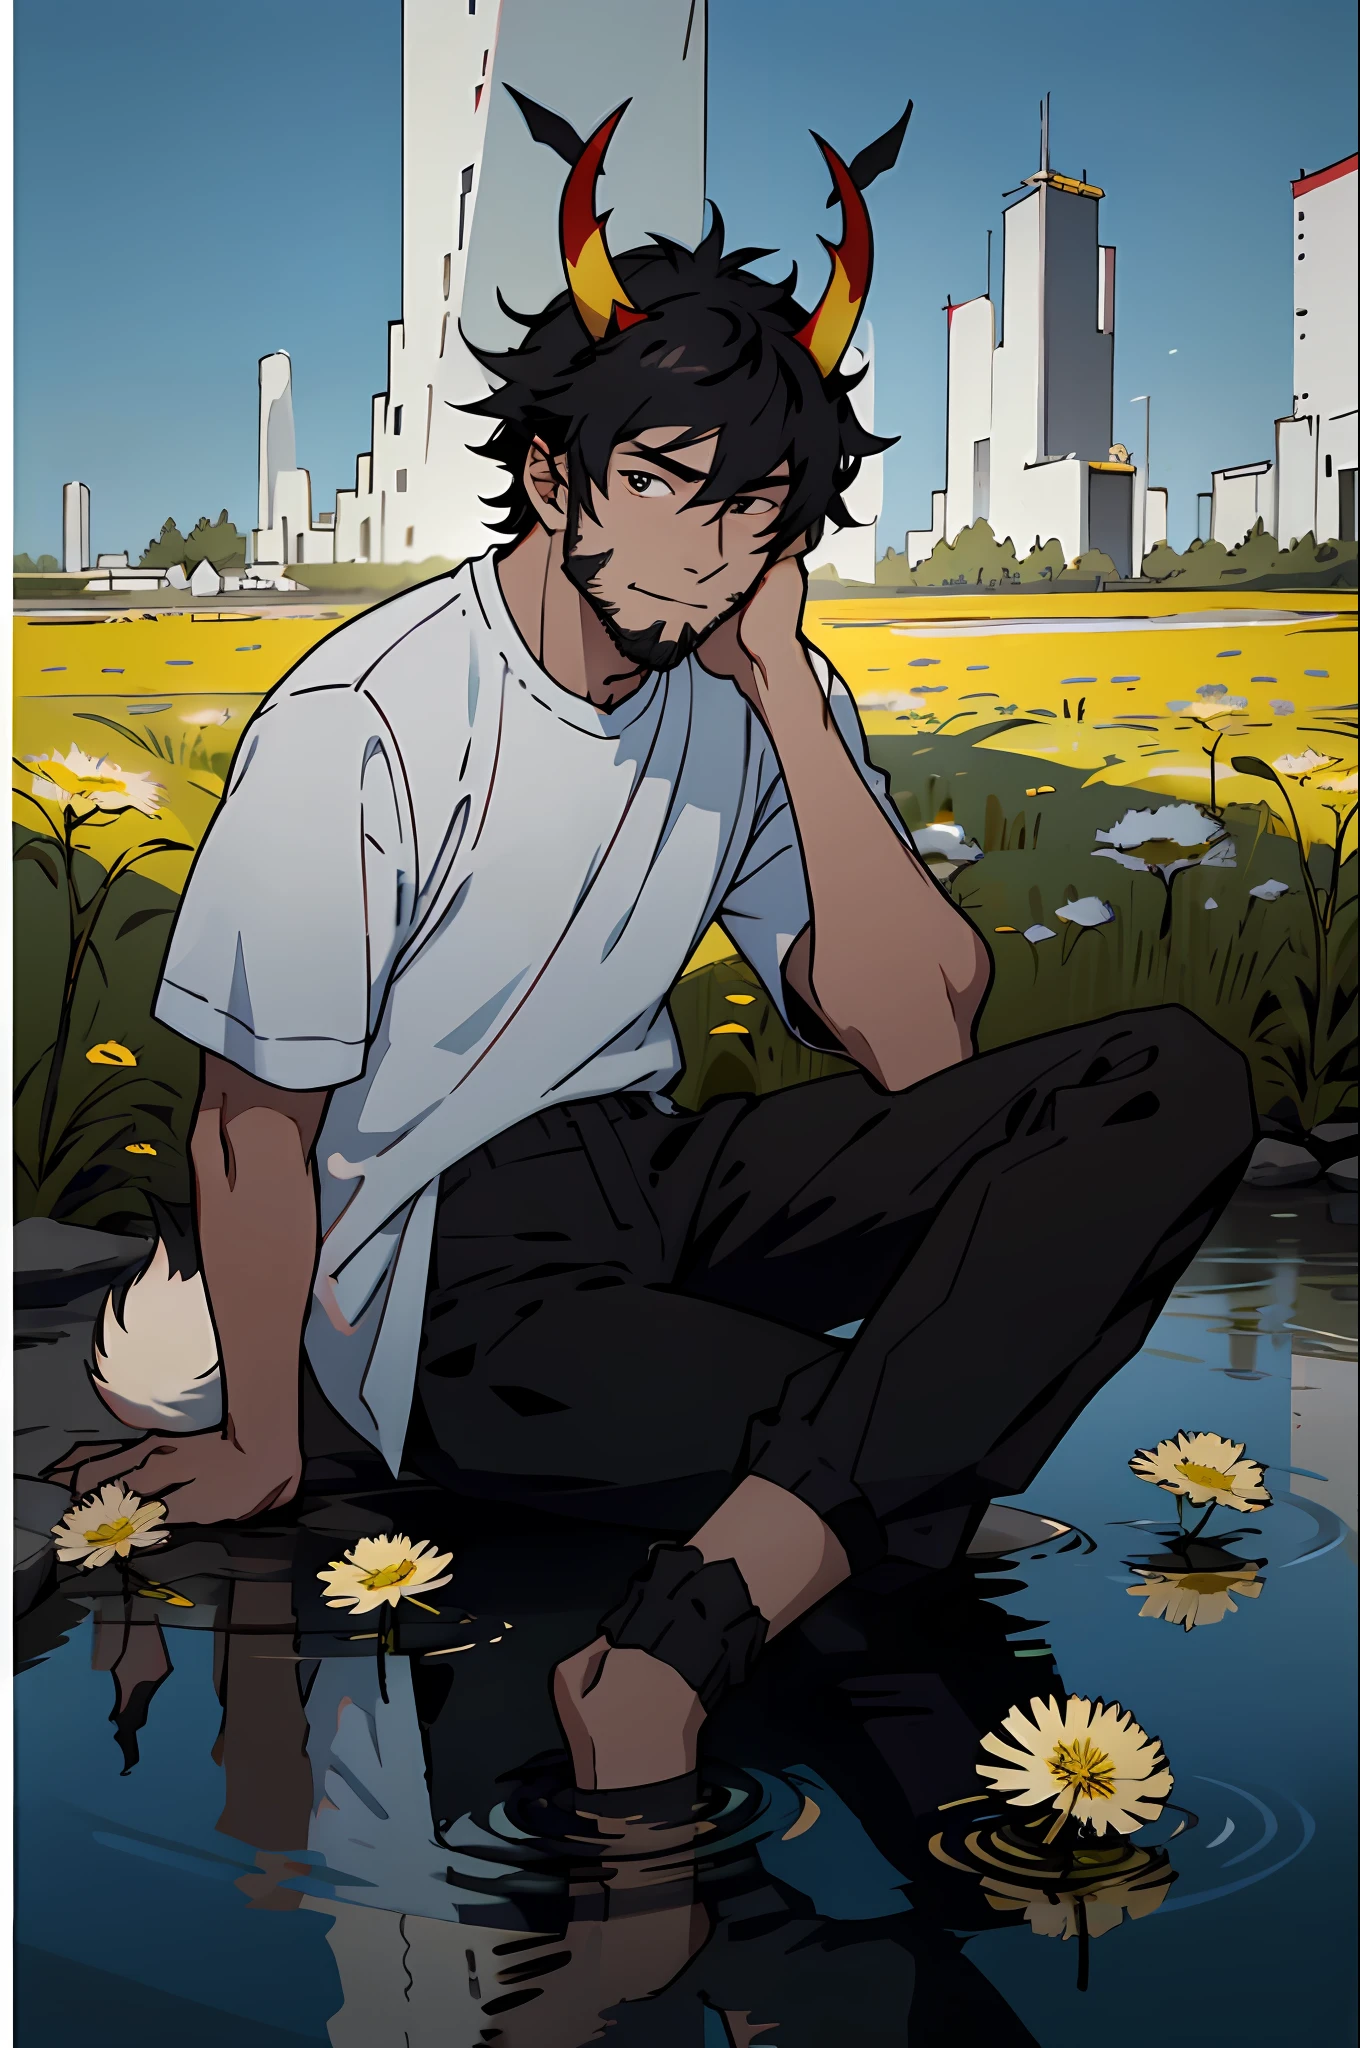 Best quality, masterpiece, expressionless, ultra high res, detailed background, realistic, 1man, solo, male, normal body ratio, 25-year-old male, short black hair, white bangs, very short stubble facial hair, soft smile, small red devil horns, long black fluffy tail, casual clothes, anime fan aesthetic, sitting, water, dandelion field, real shadow and light, depth of field.